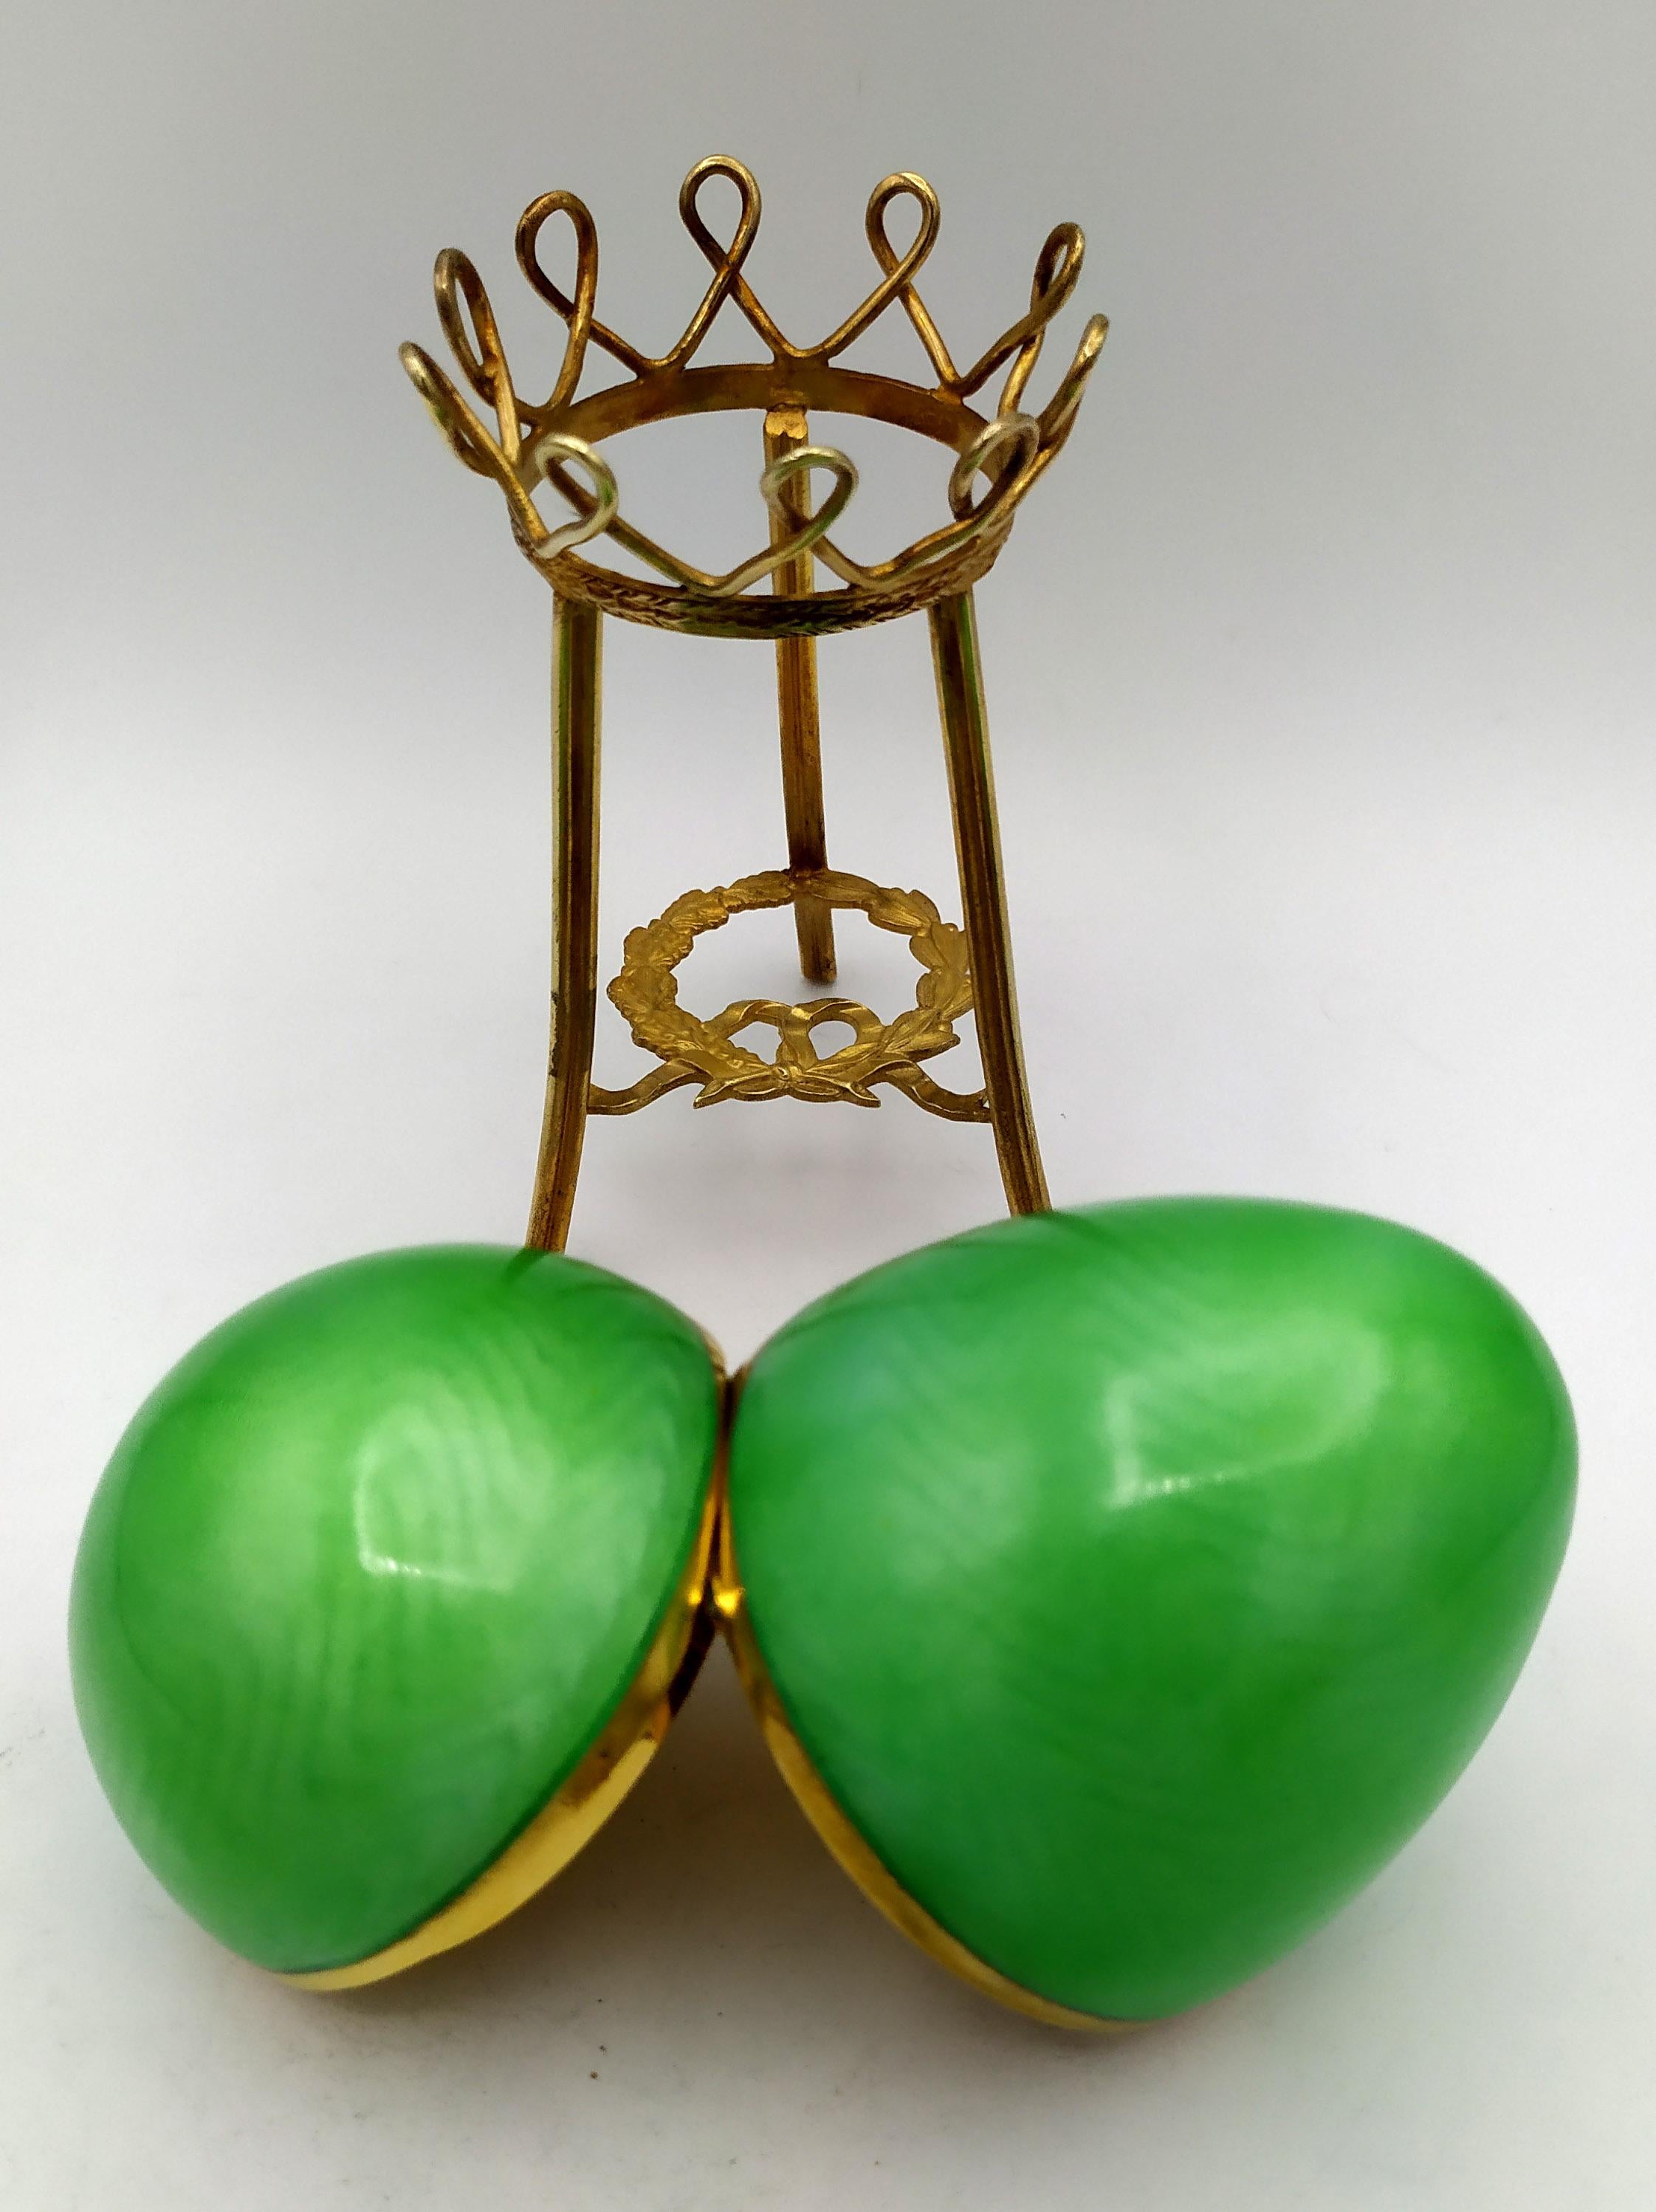 Mid-20th Century Egg Russian Empire style enamel with tall tripod Sterling Silver Salimbeni  For Sale